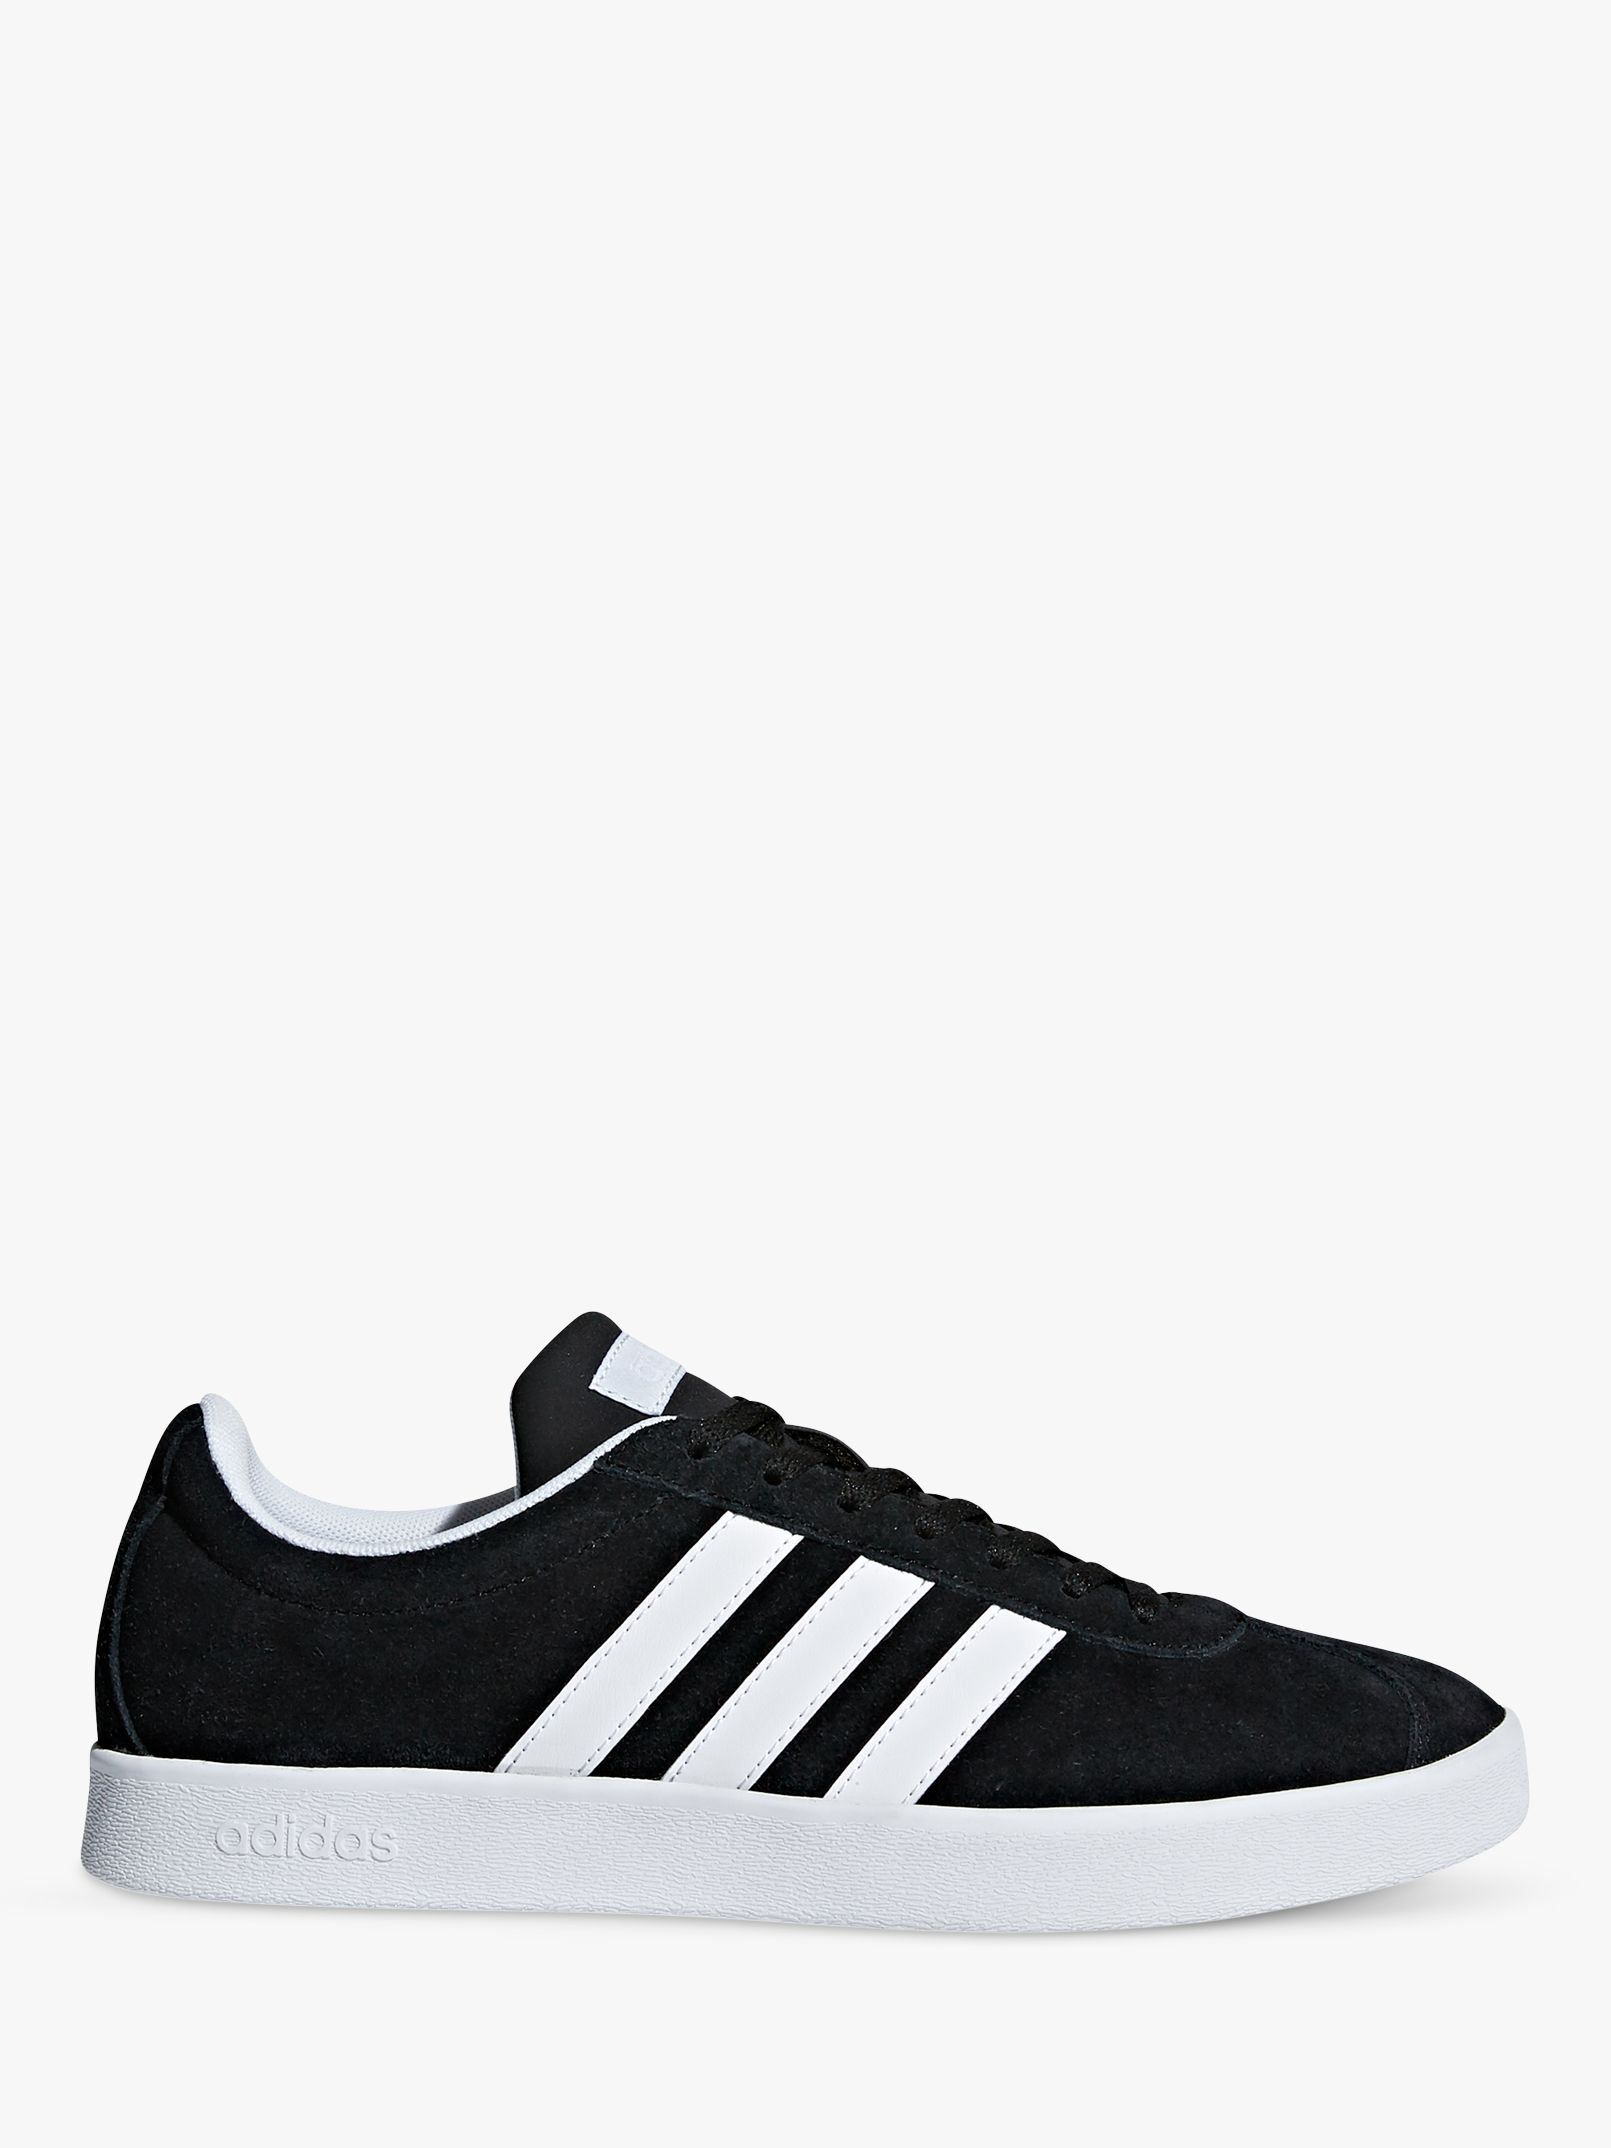 adidas black pink trainers